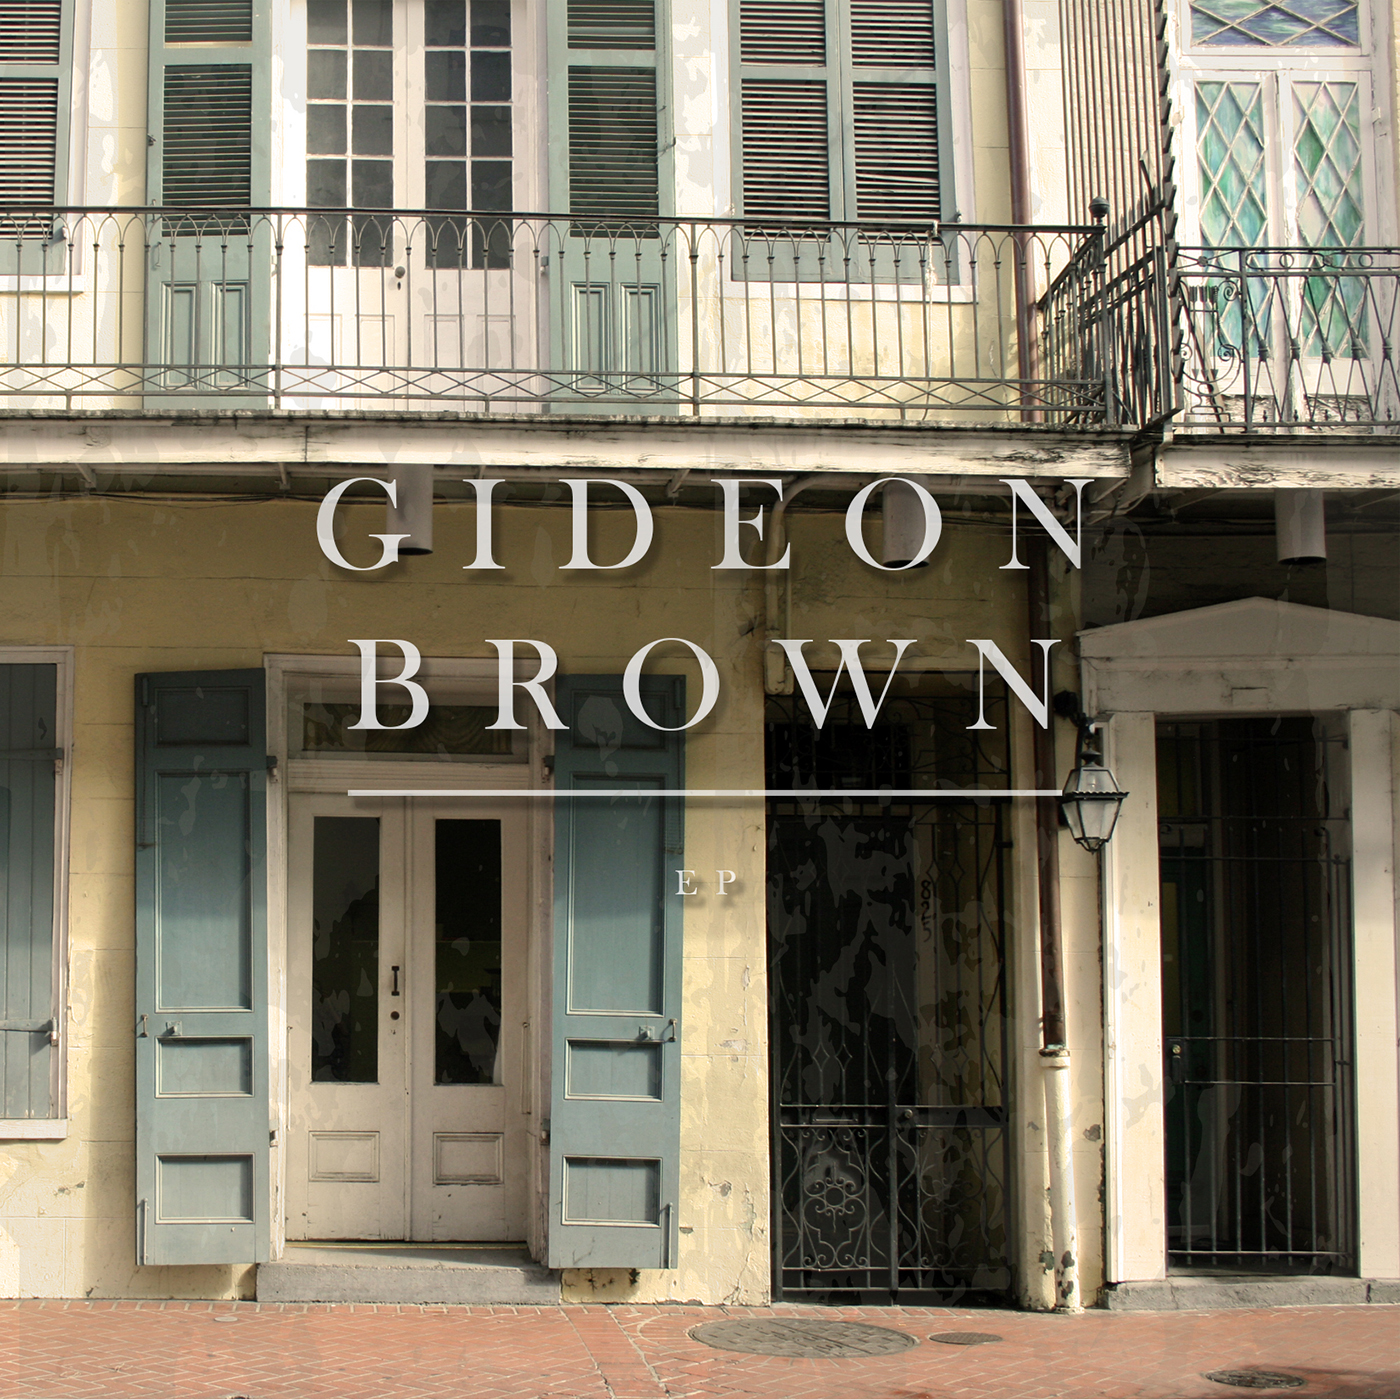 GideonBrown_EP for iTunes.jpg